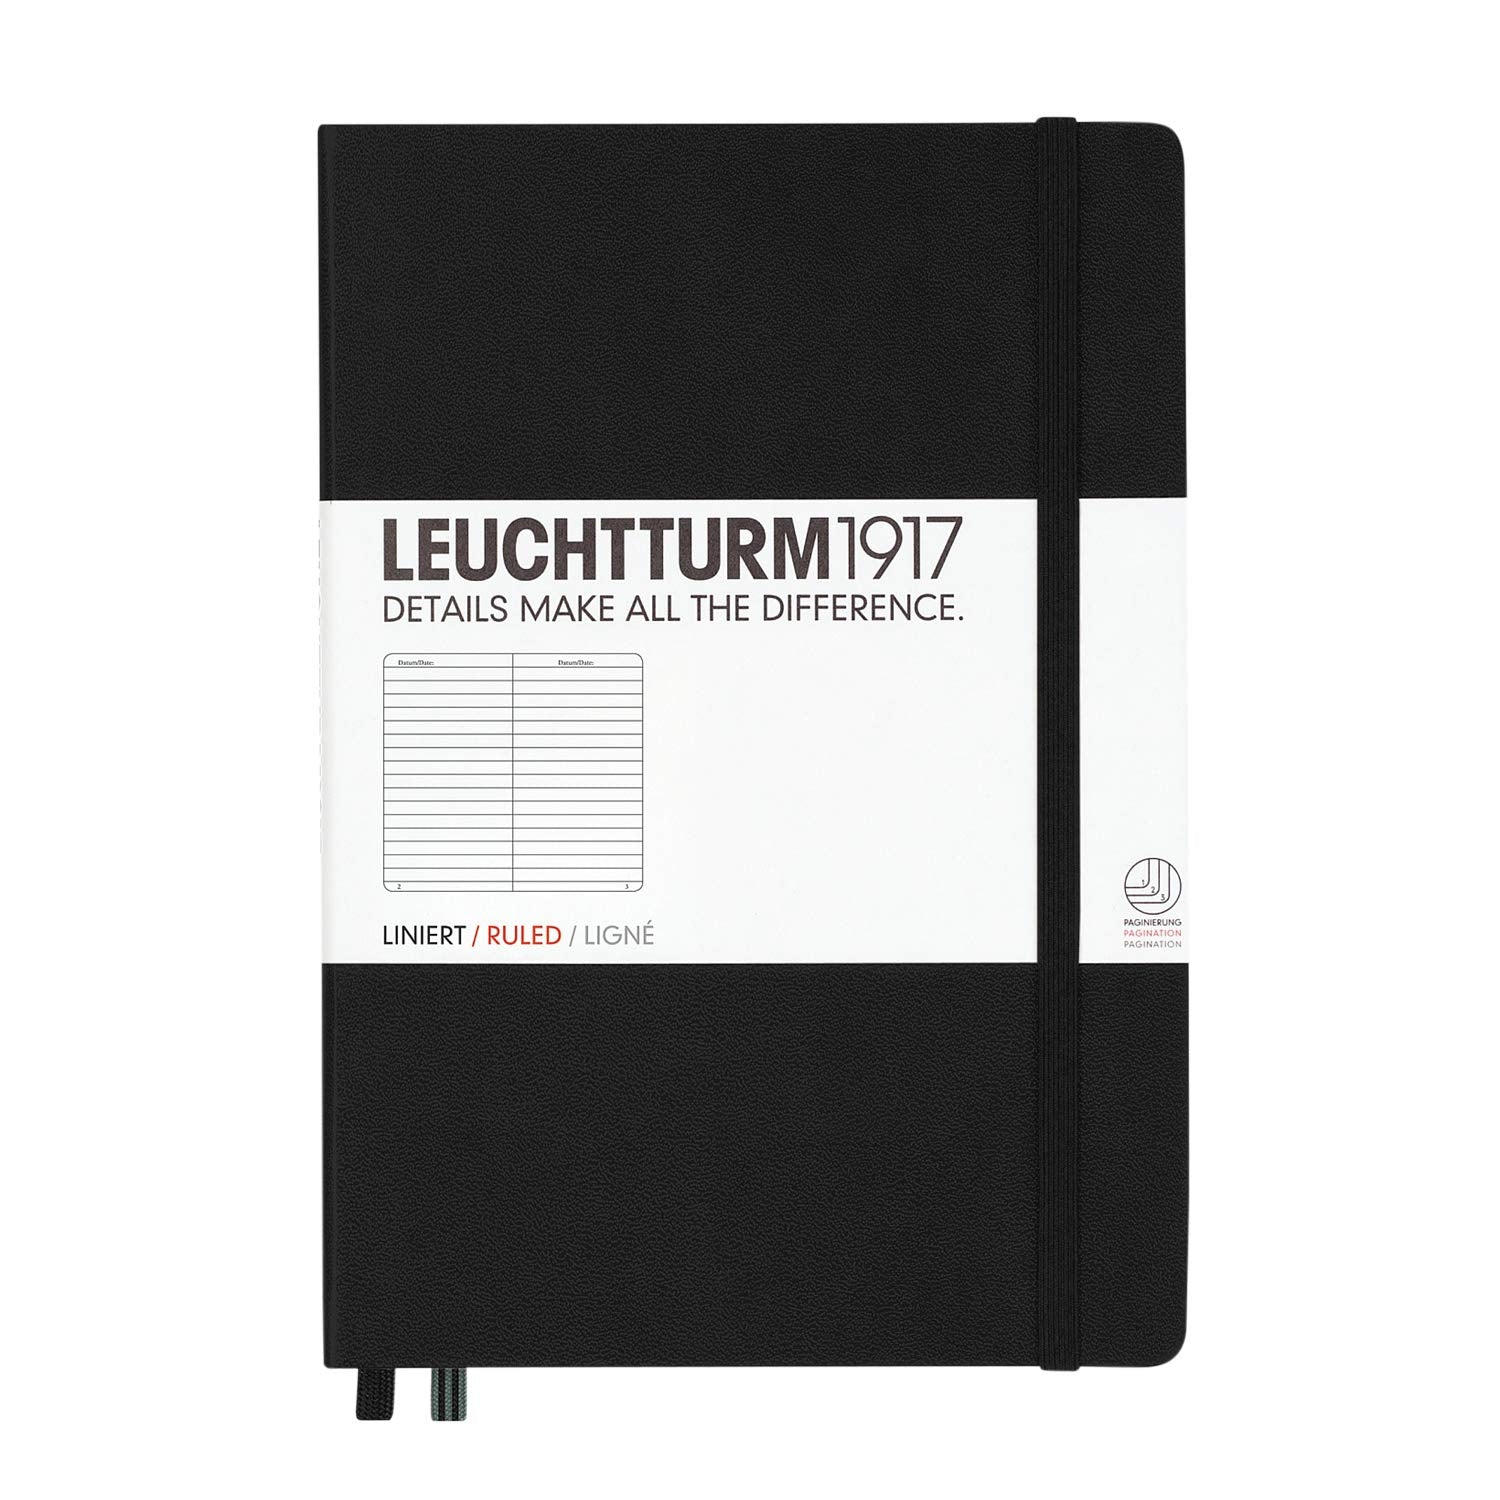 Leuchtturm1917 Medium A5 Ruled Hardcover Notebook (Black) - 249 Numbered Pages